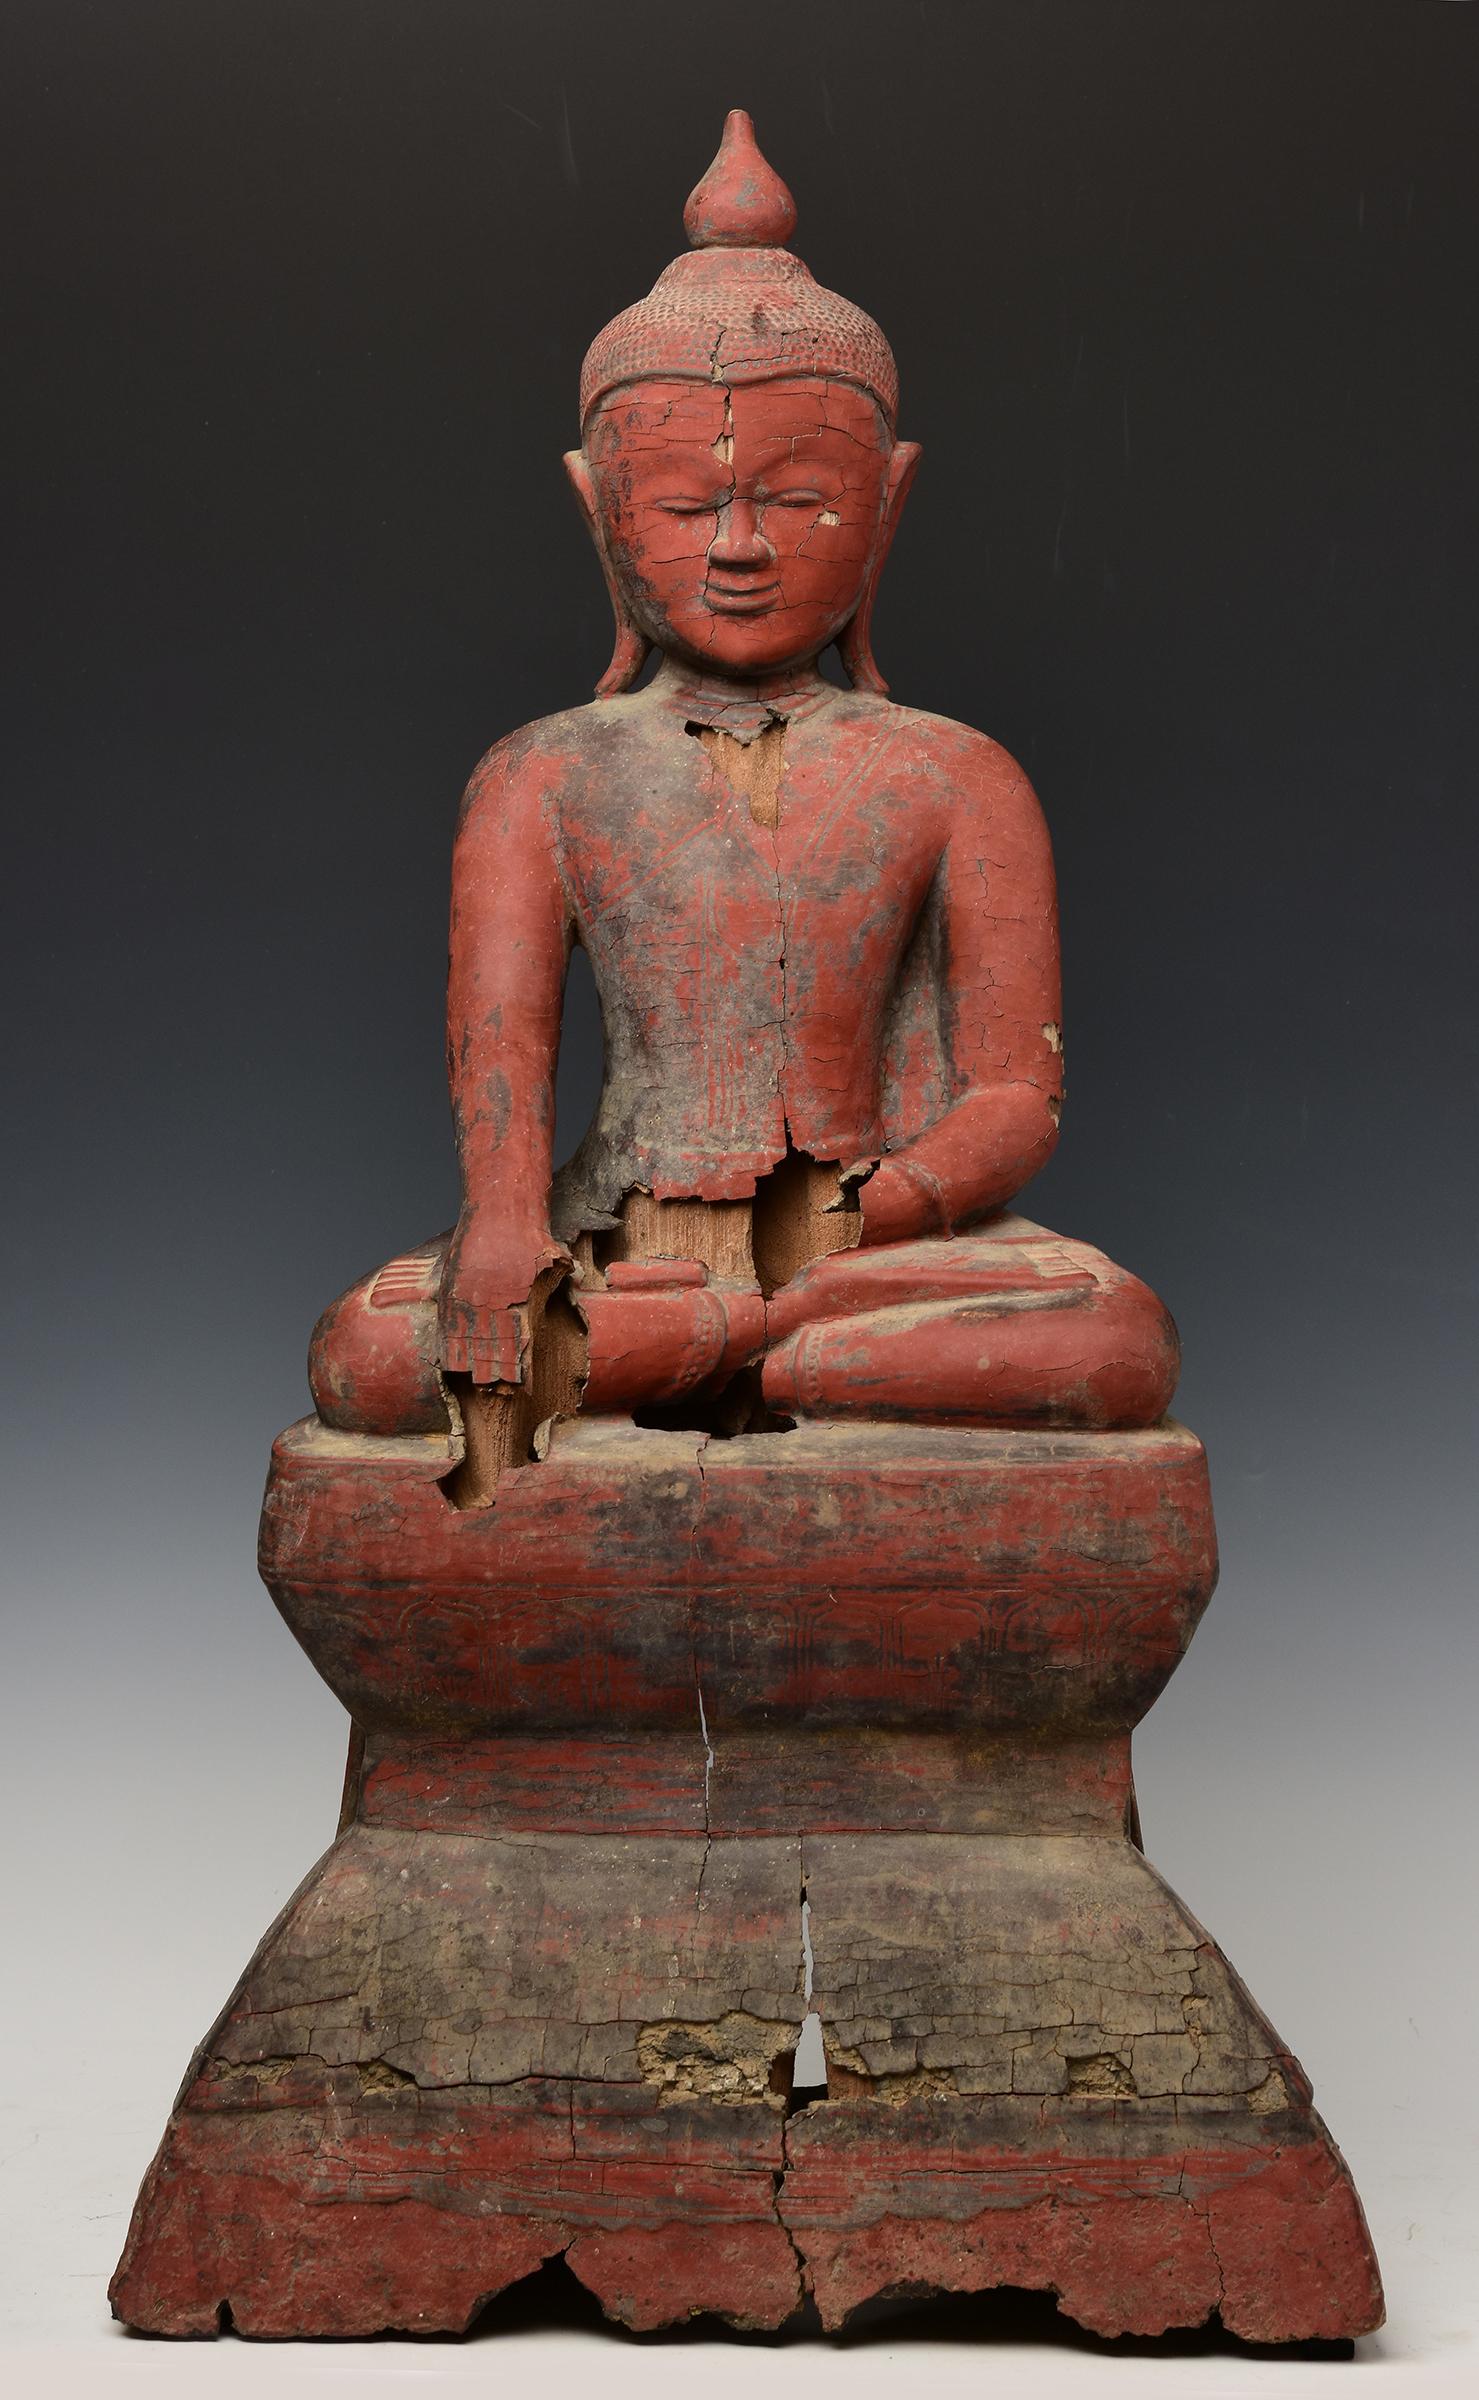 Burmese wooden Buddha sitting in Mara Vijaya (calling the earth to witness) posture on a base.

Age: Burma, Ava Period, 15th century
Size: Height 67.5 C.M. / Width 37.8 C.M. / Depth 20.5 C.M.
Condition: Intact with original condition.

100%